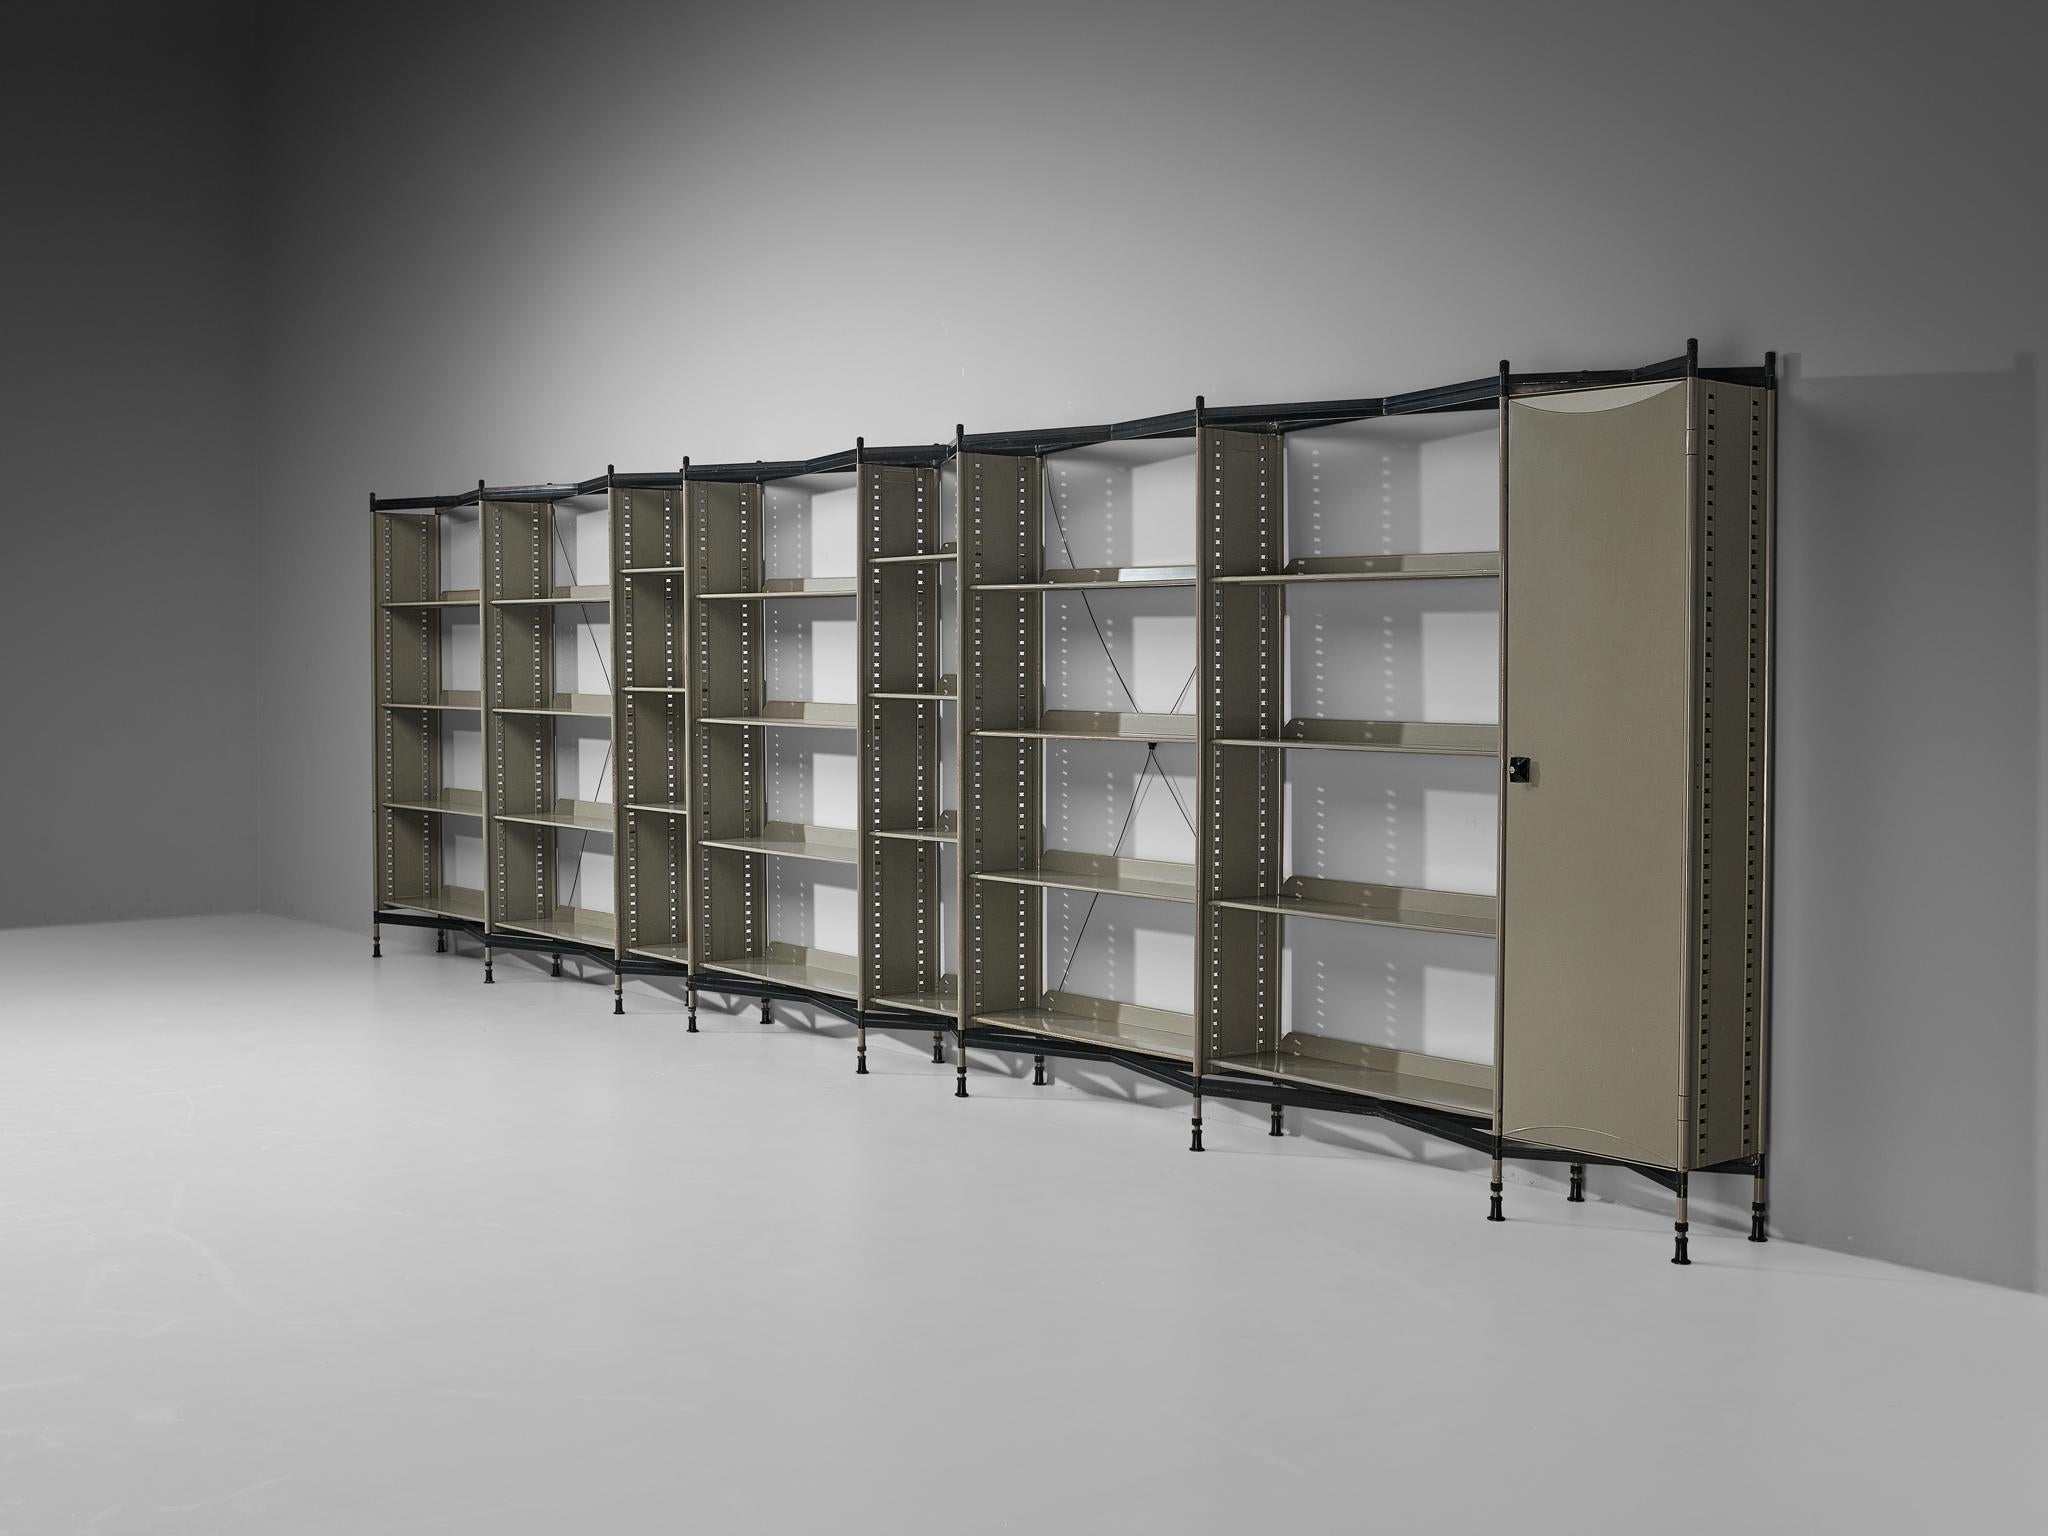 Studio BBPR for Olivetti, 'Spazio' shelving system, lacquered steel, plastic, Italy, design 1959/60, production 1960s 

Large modular shelving system designed by Studio BBPR for Olivetti. In 1954, Olivetti, the Italian office equipment manufacturer,